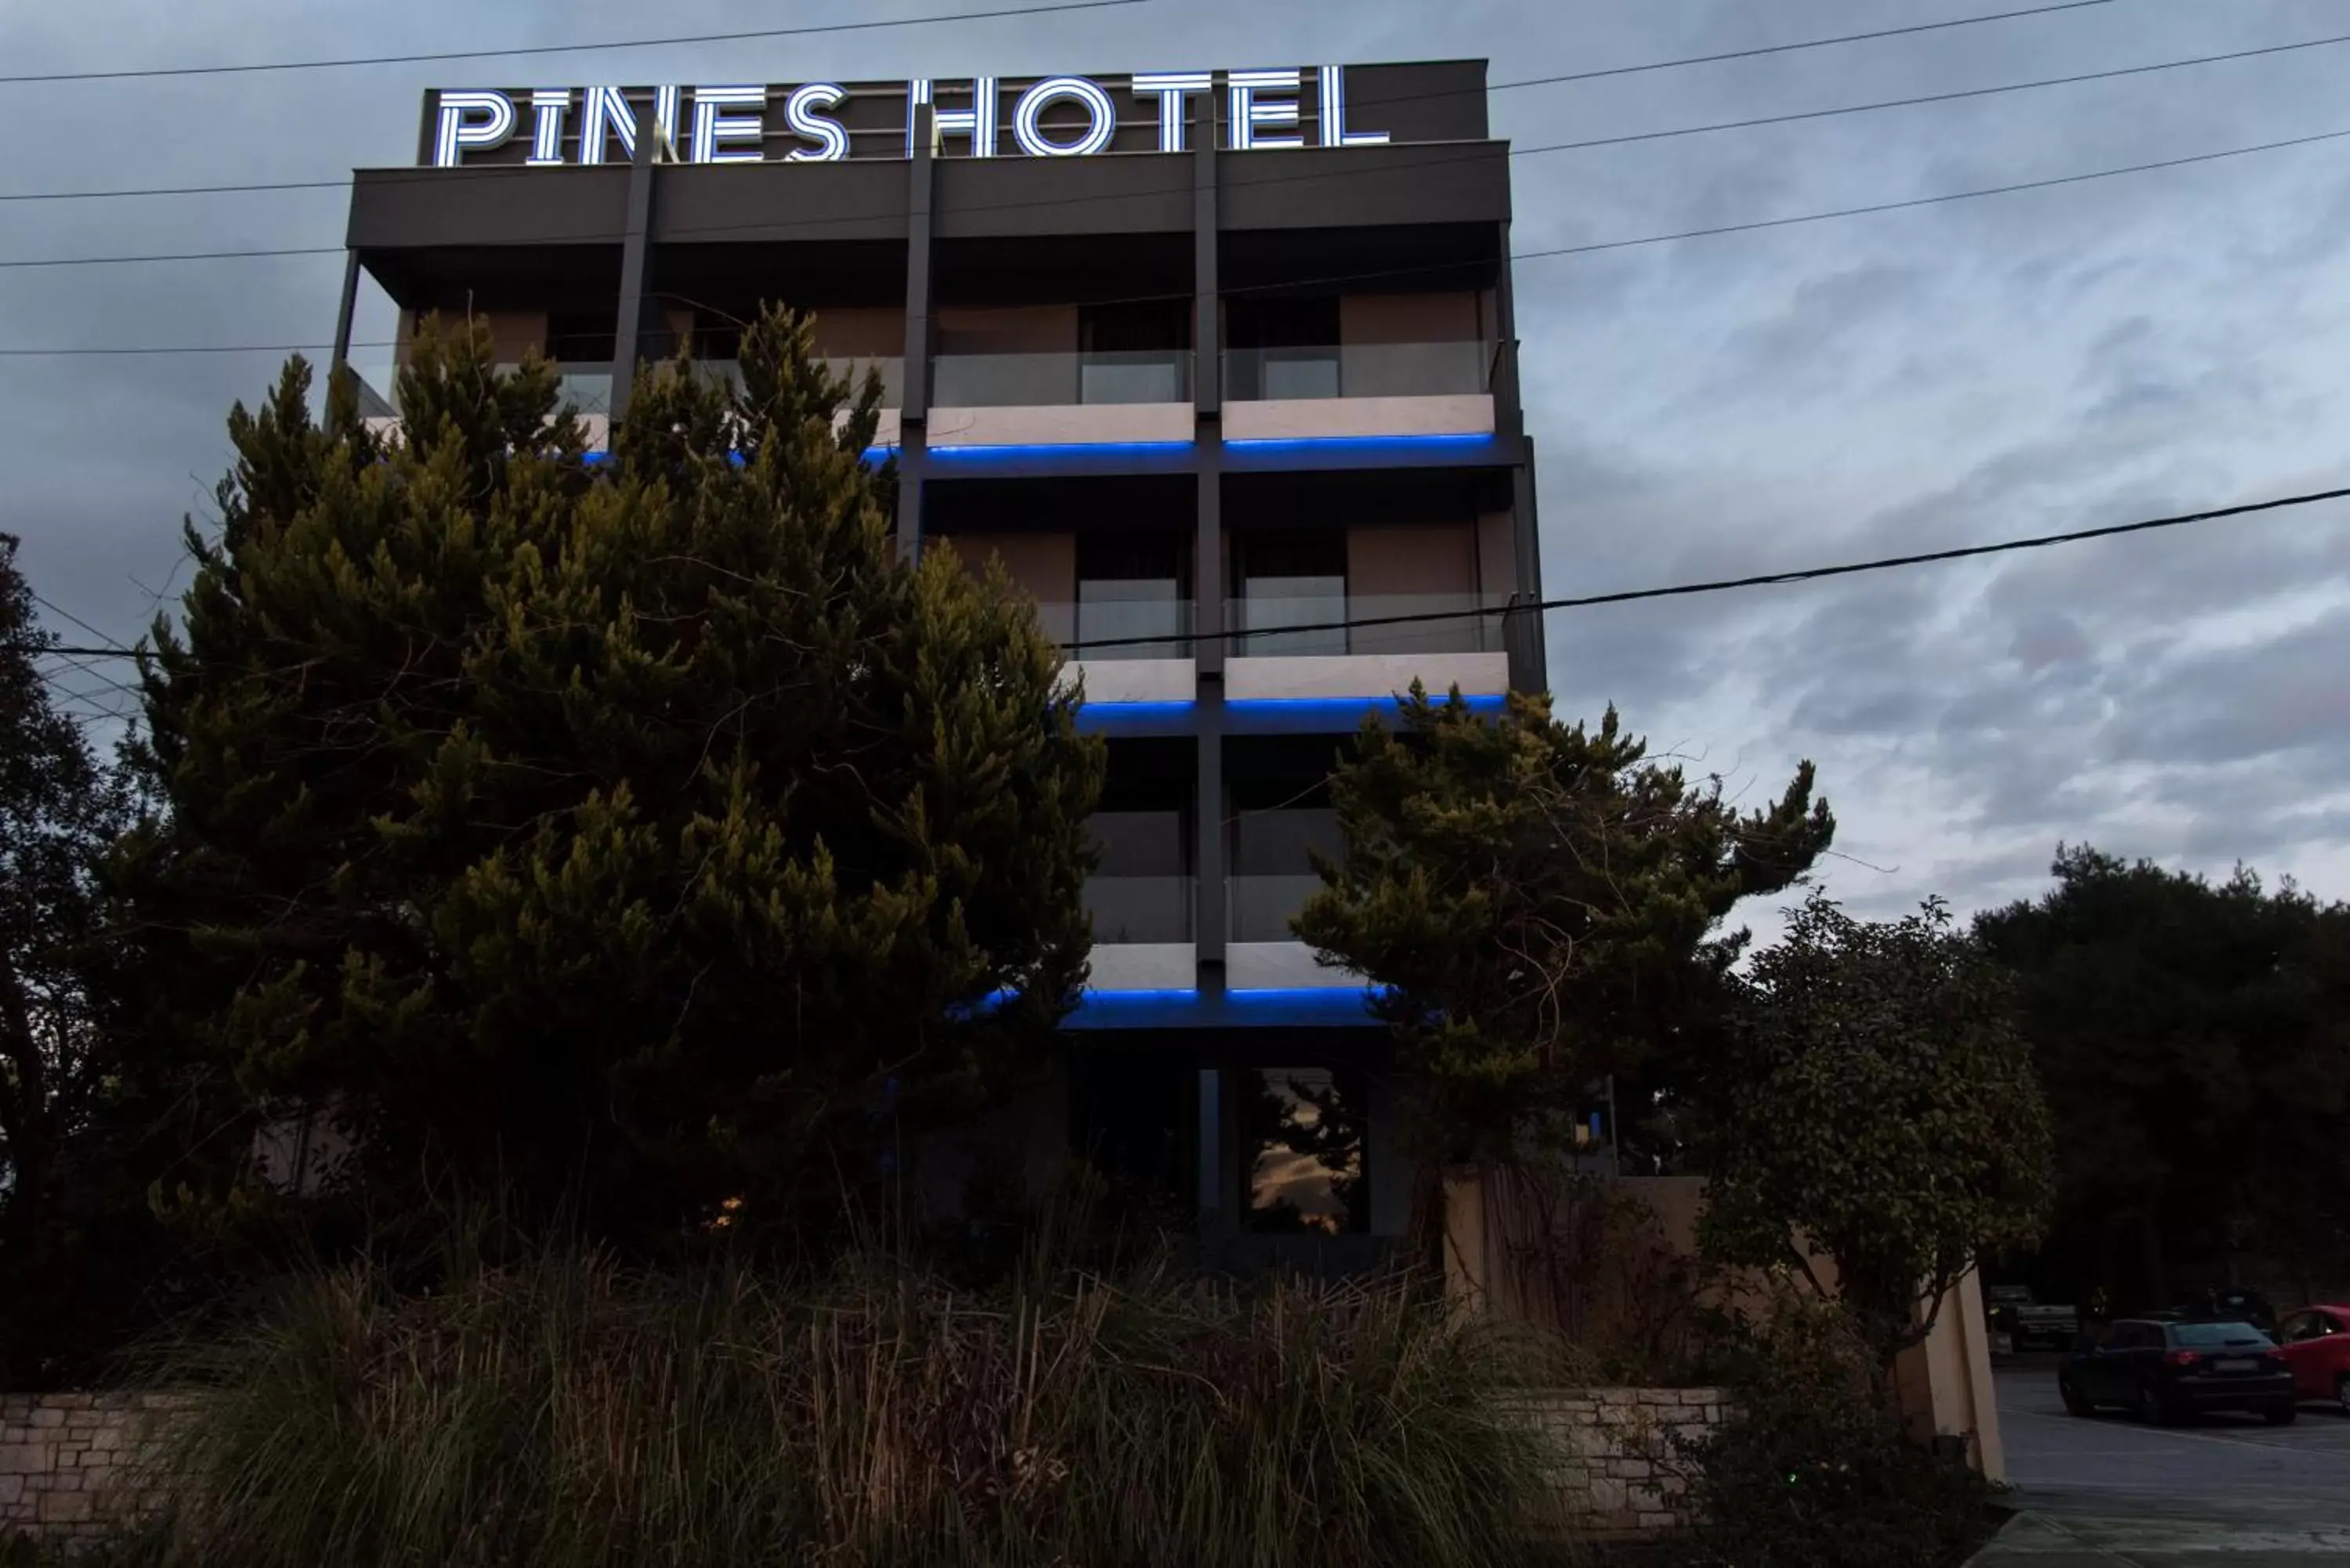 Property Building in Pines Hotel